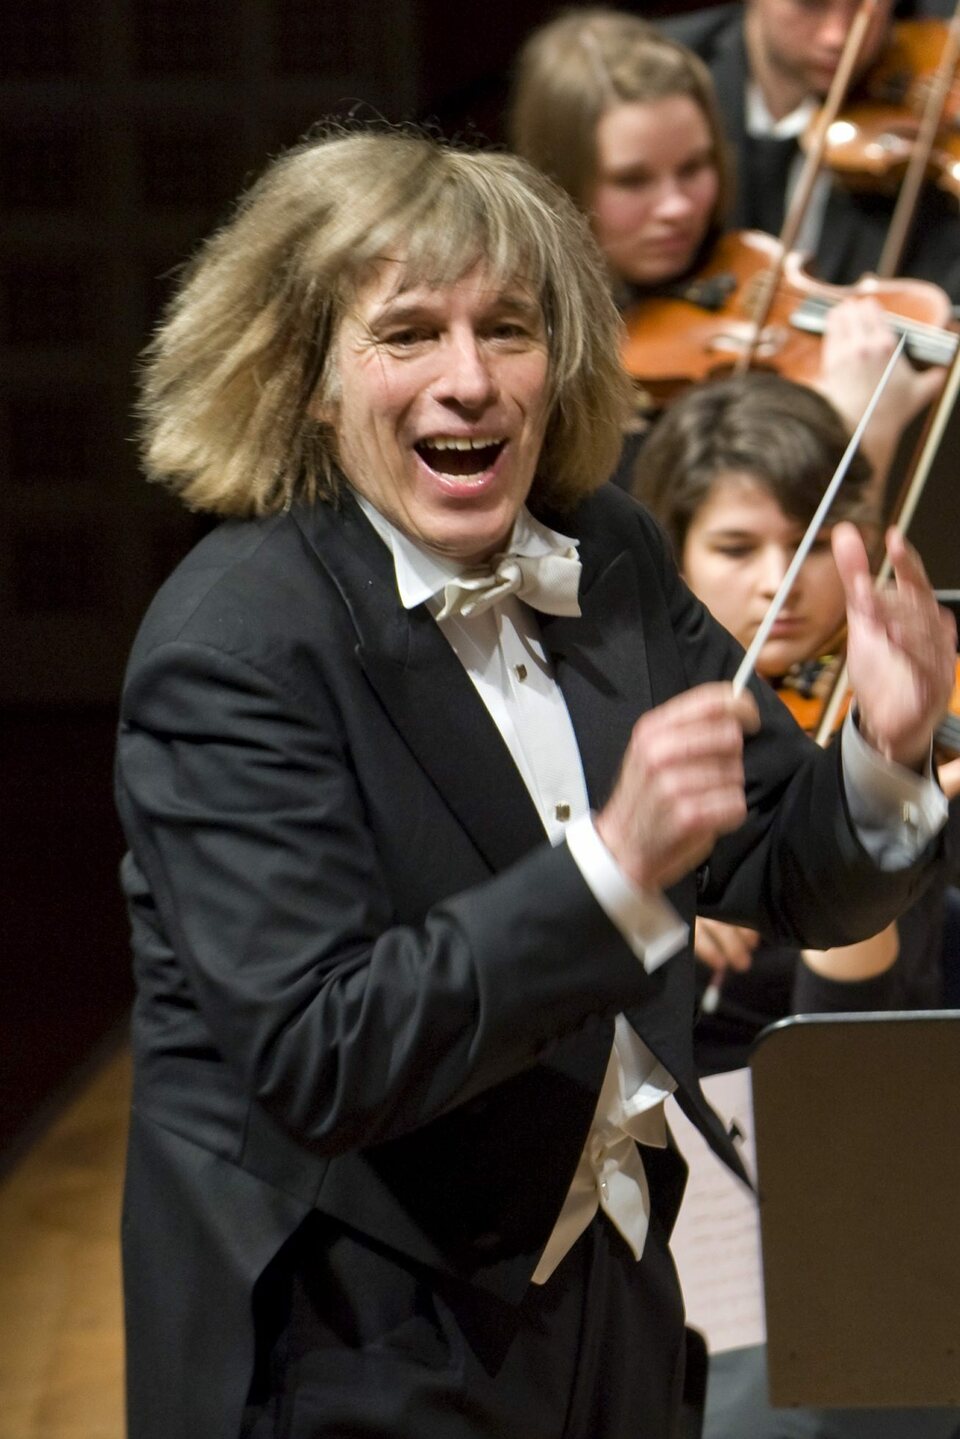 A handout image provided by the Lucerne University of Applied Sciences and Arts on 30 January 2015 shows Israeli conductor Israel Yinon performing in Lucerne, Switzerland, 29 January 2012. The 59-year-old conductor collapsed on stage during a concert in Lucerne on 29 January 2015 and passed away shortly after. (EPA Photo/Priska Ketterer)